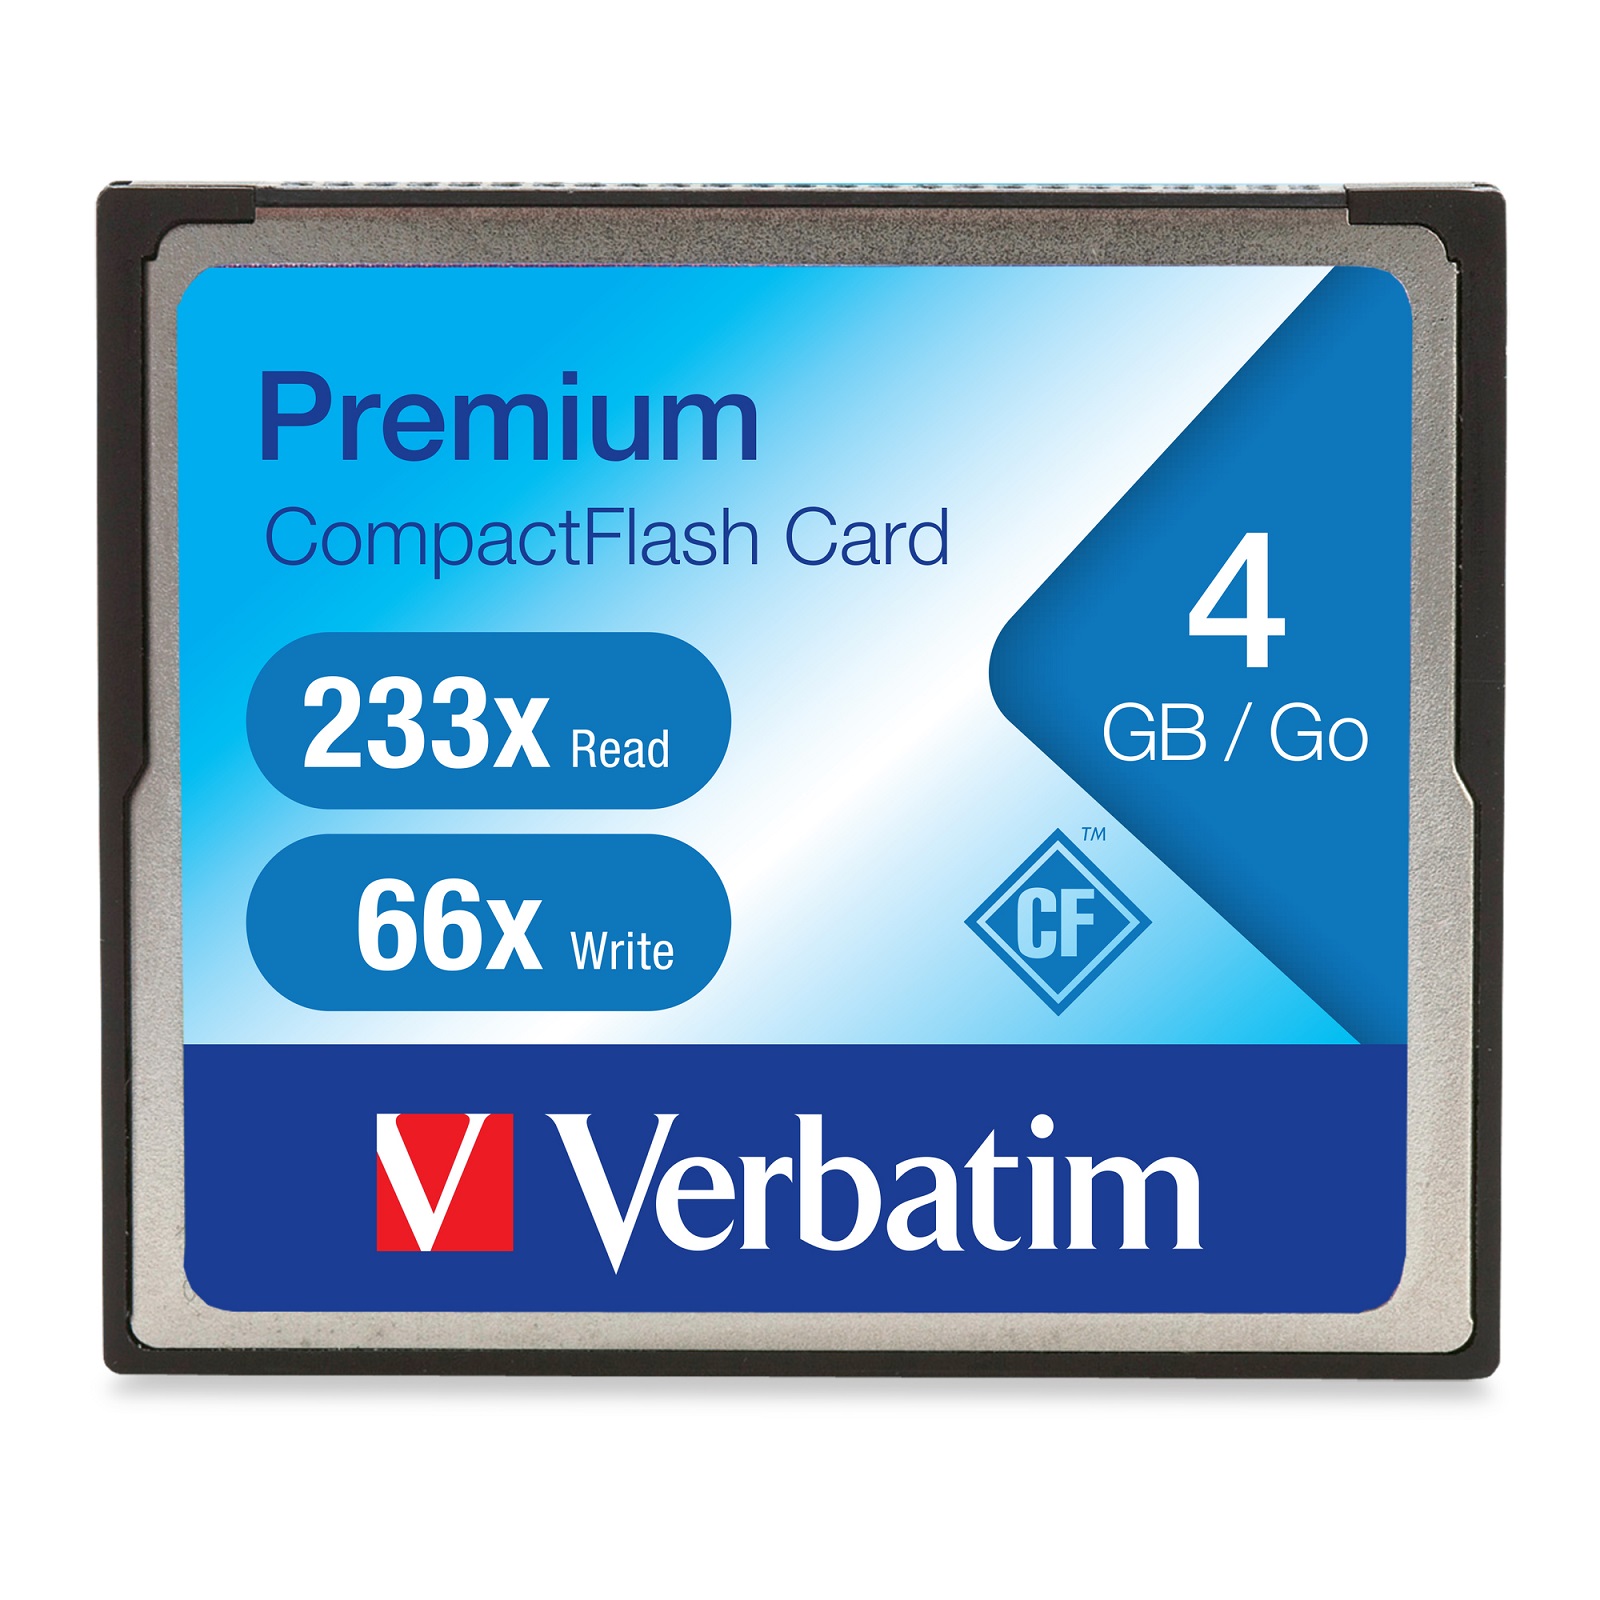 You may also be interested in the Verbatim 95169 CD-RW 700MB 2X-4X Branded 25 Spin.